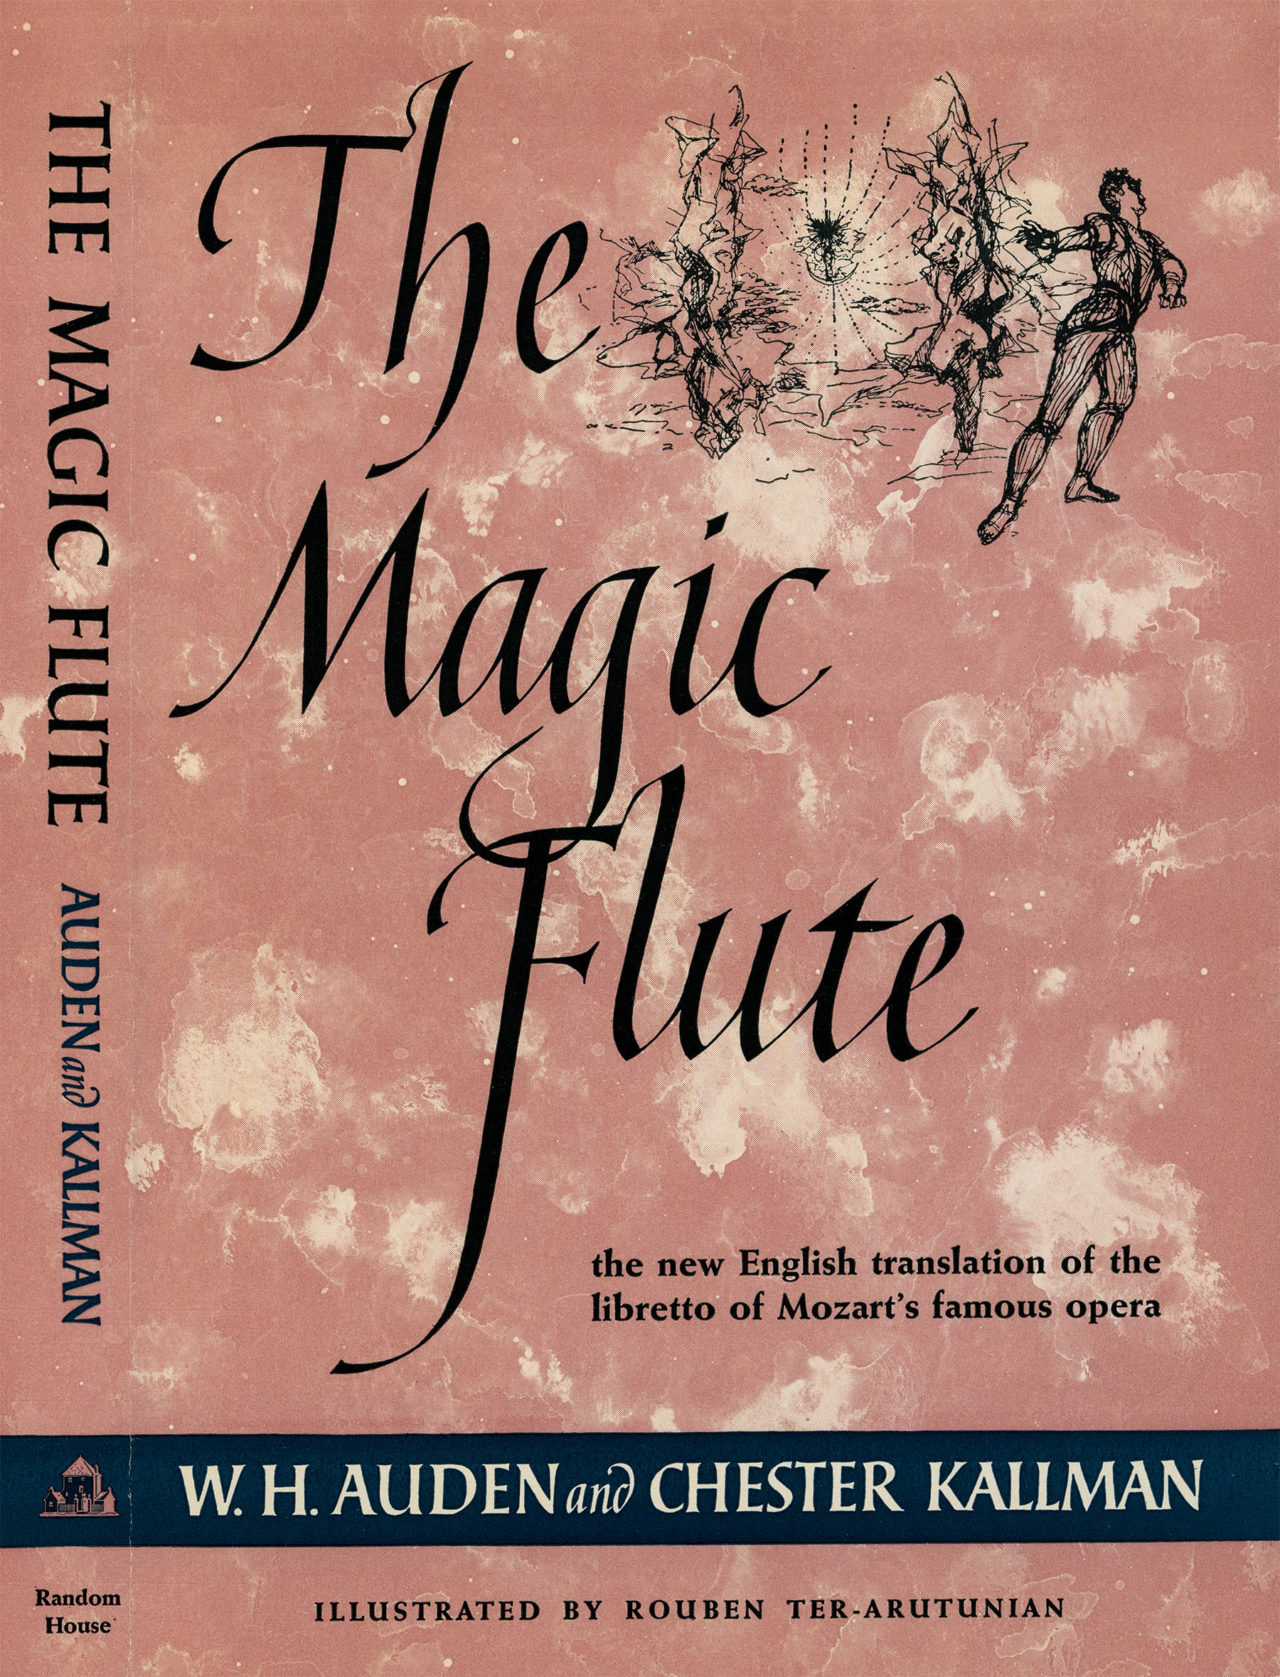 Book jacket of The Magic Flute